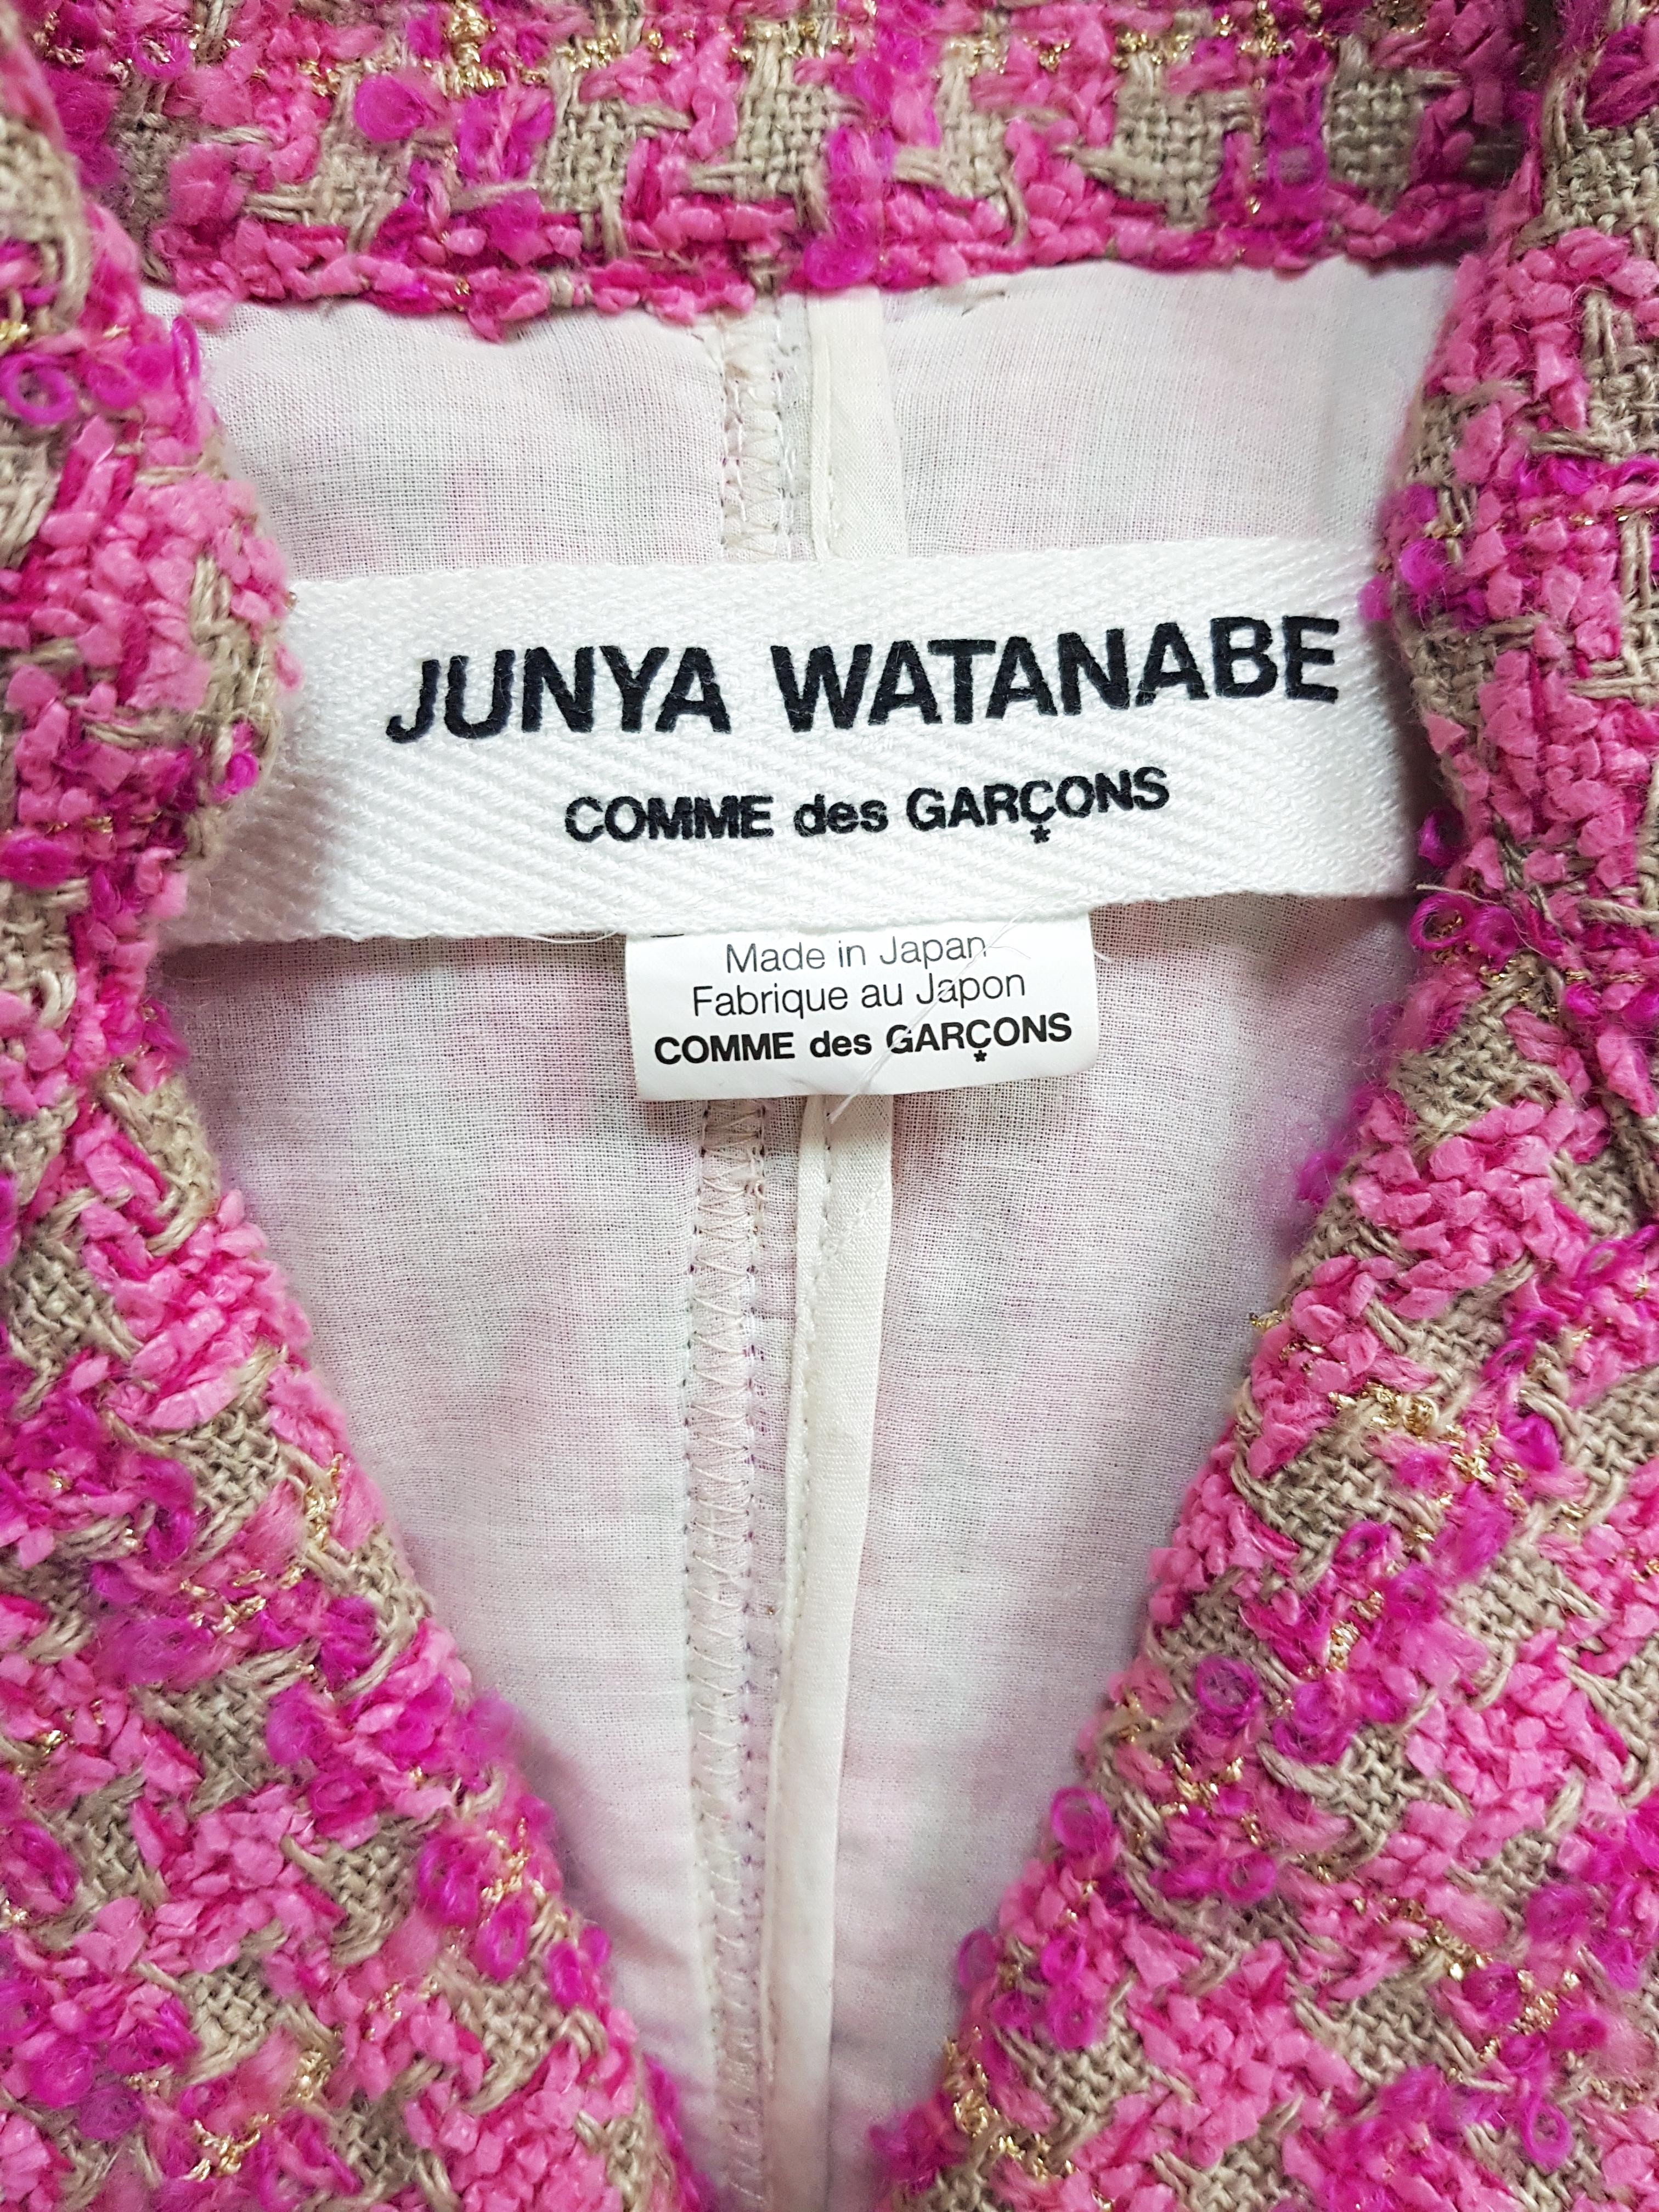 Junya Watanabe x Comme des Garcons pink tweed jacket, beautifully made and structured (detailed sleeve ends, 2 frontal buttons to change fitting shape, collar, interior finishes...).

Raw edges
Two front closing buttons
Two frontal pockets
Open cuff